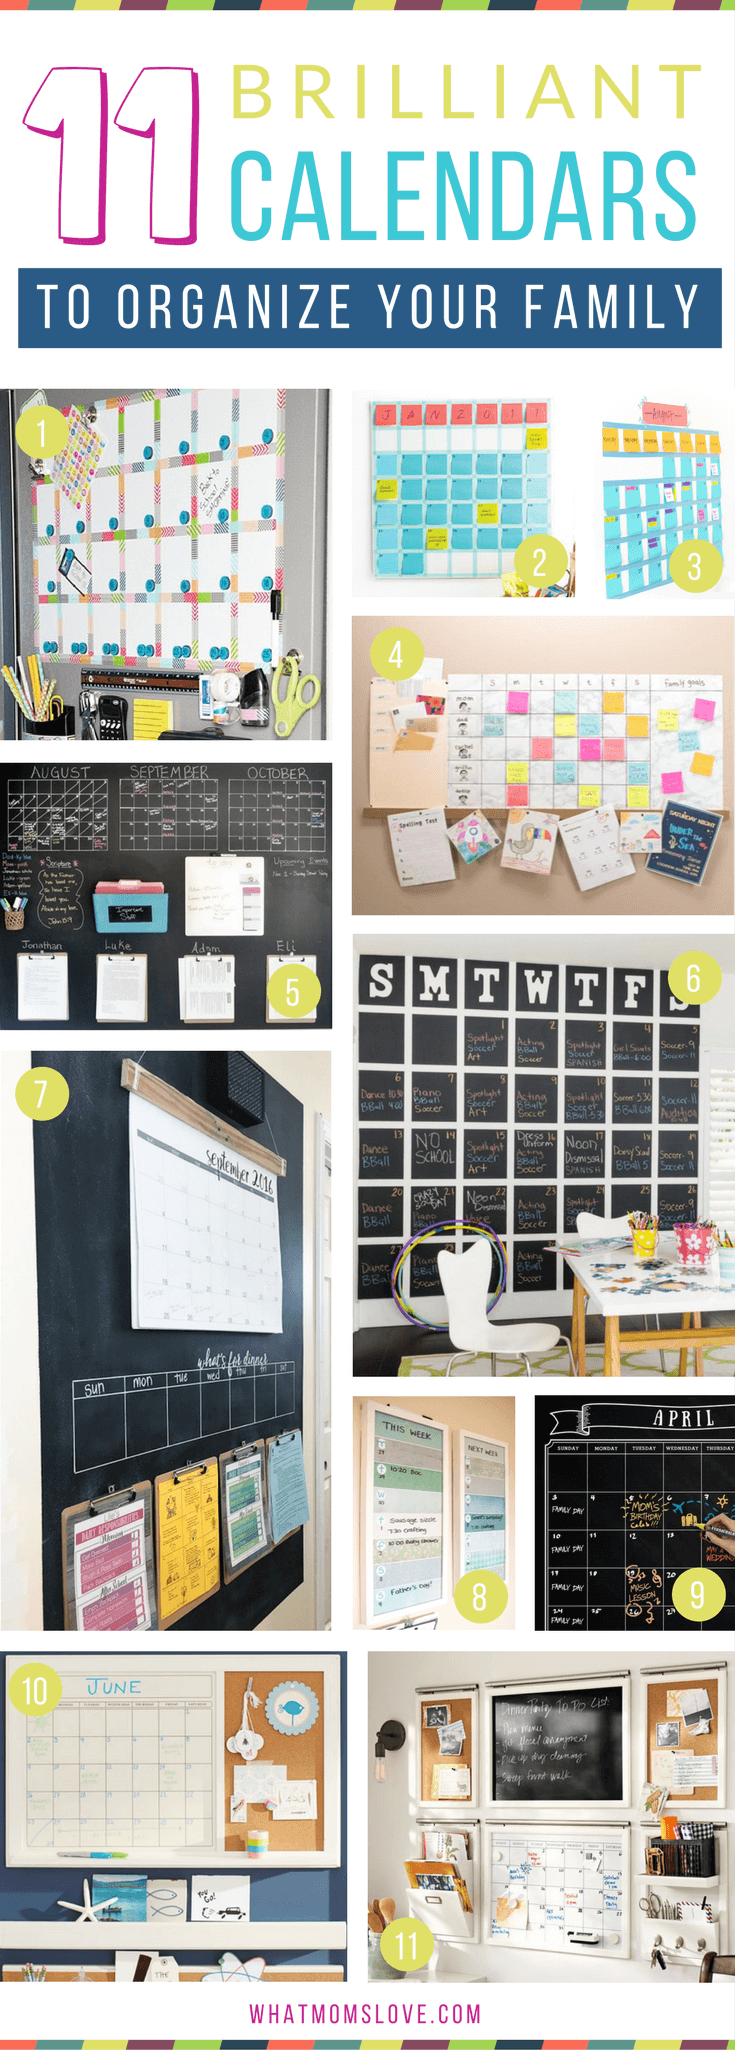 How to create a family wall calendar to organize your life | DIY Calendars and Command Center ideas, plus more tips, hacks and tricks to survive summer with your kids